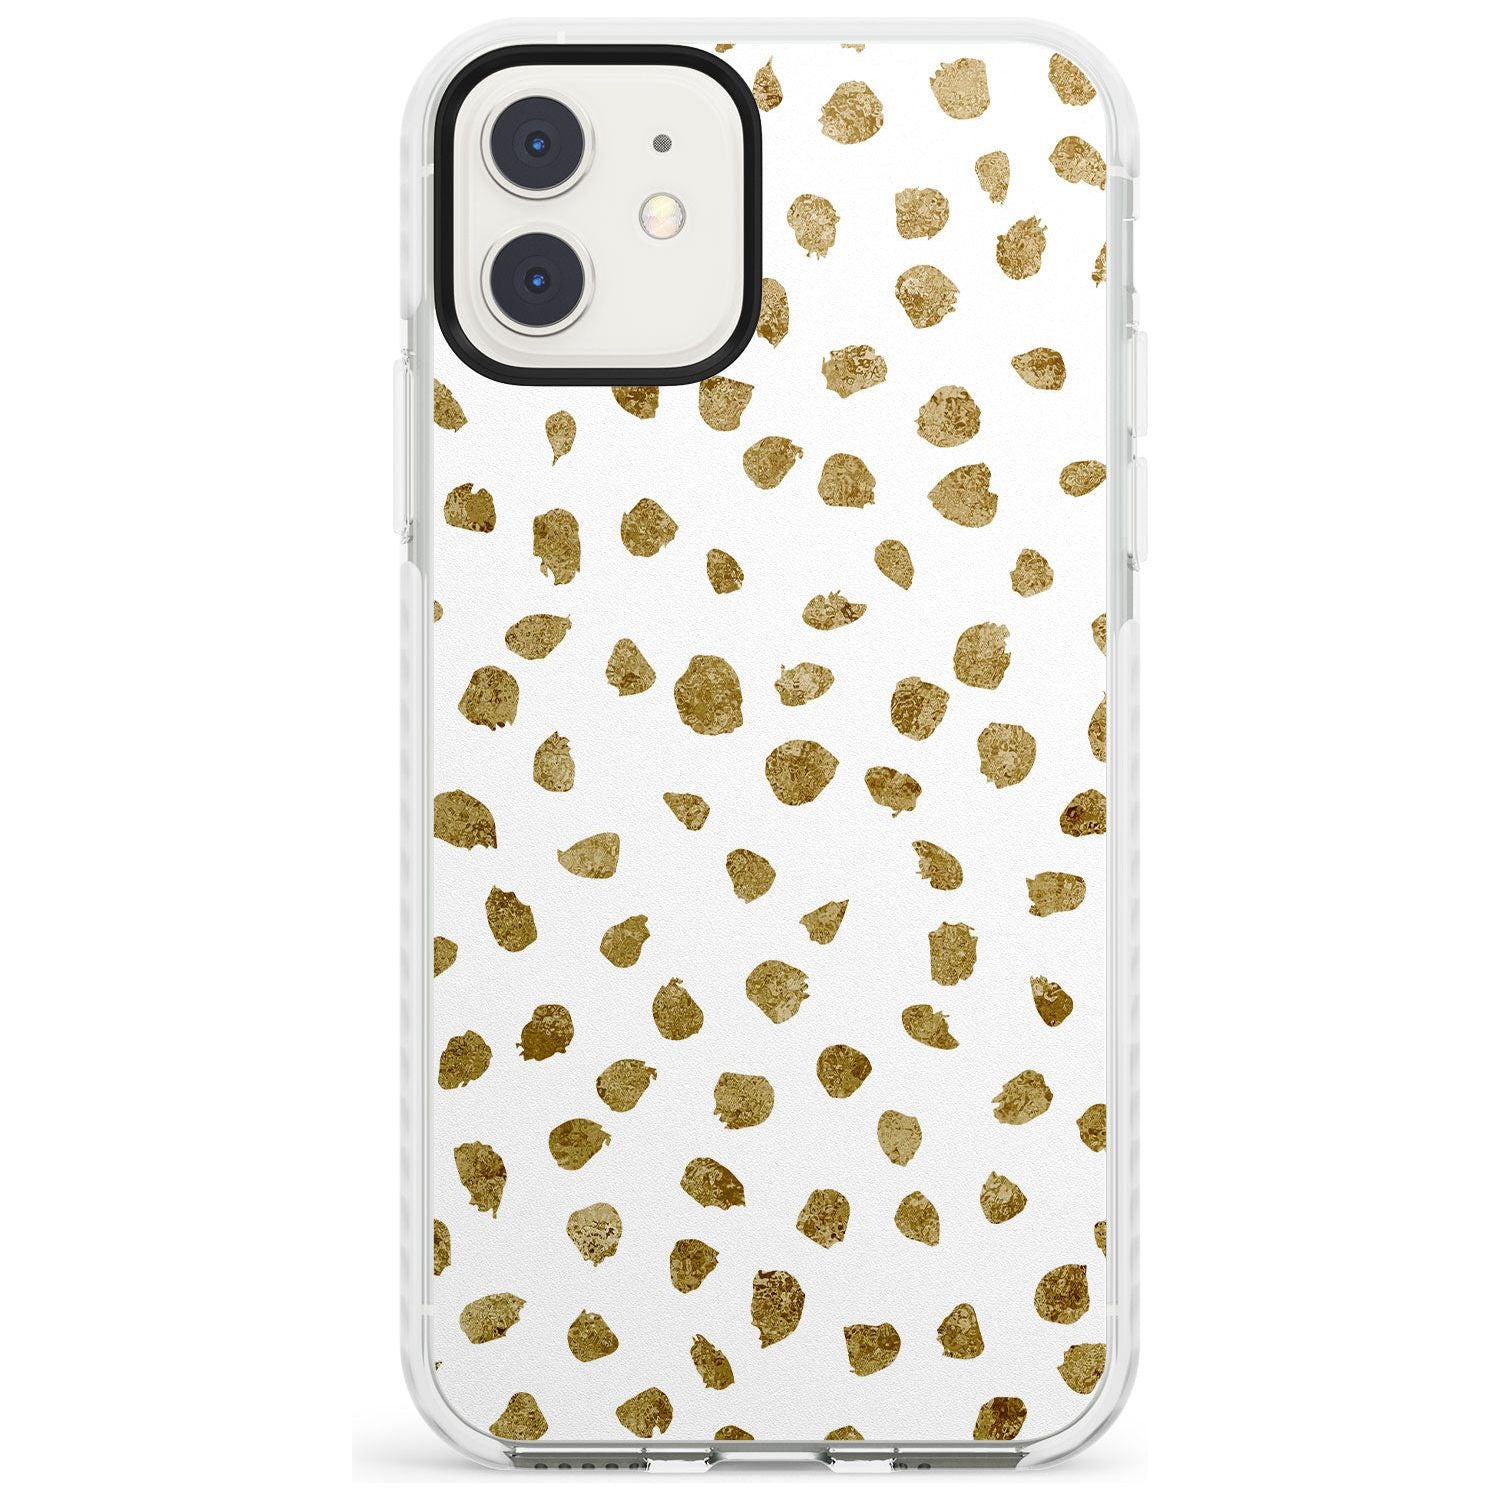 Gold Look on White Dalmatian Polka Dot Spots Impact Phone Case for iPhone 11